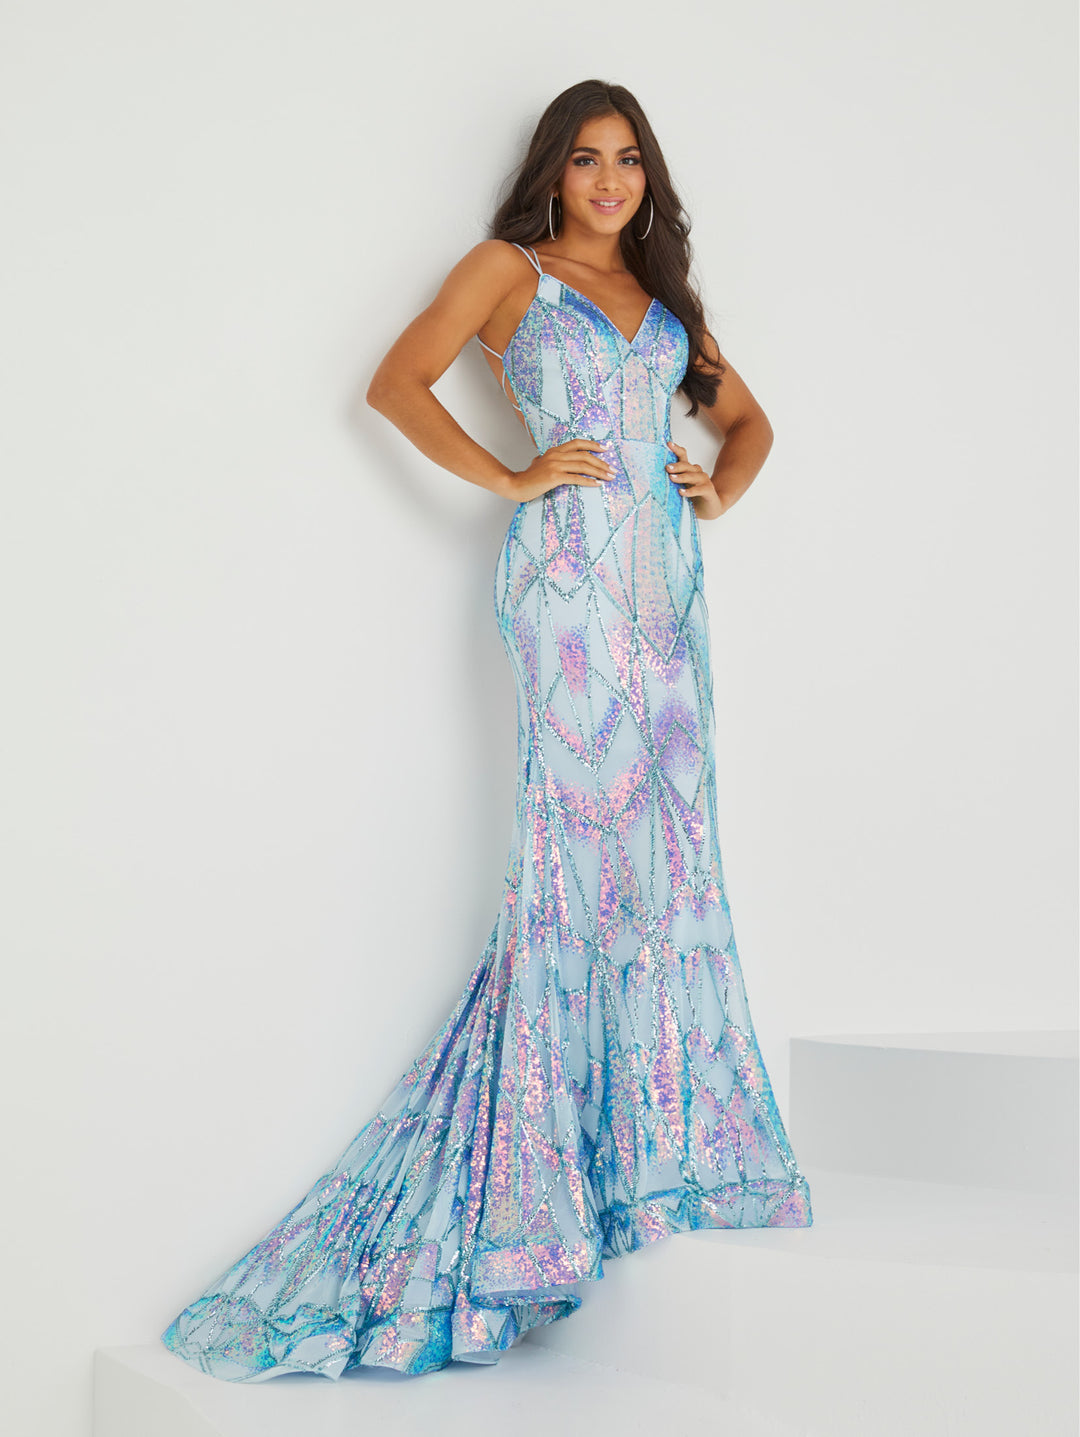 Fitted Linear Sequin Print V-Neck Gown by Tiffany Designs 16019